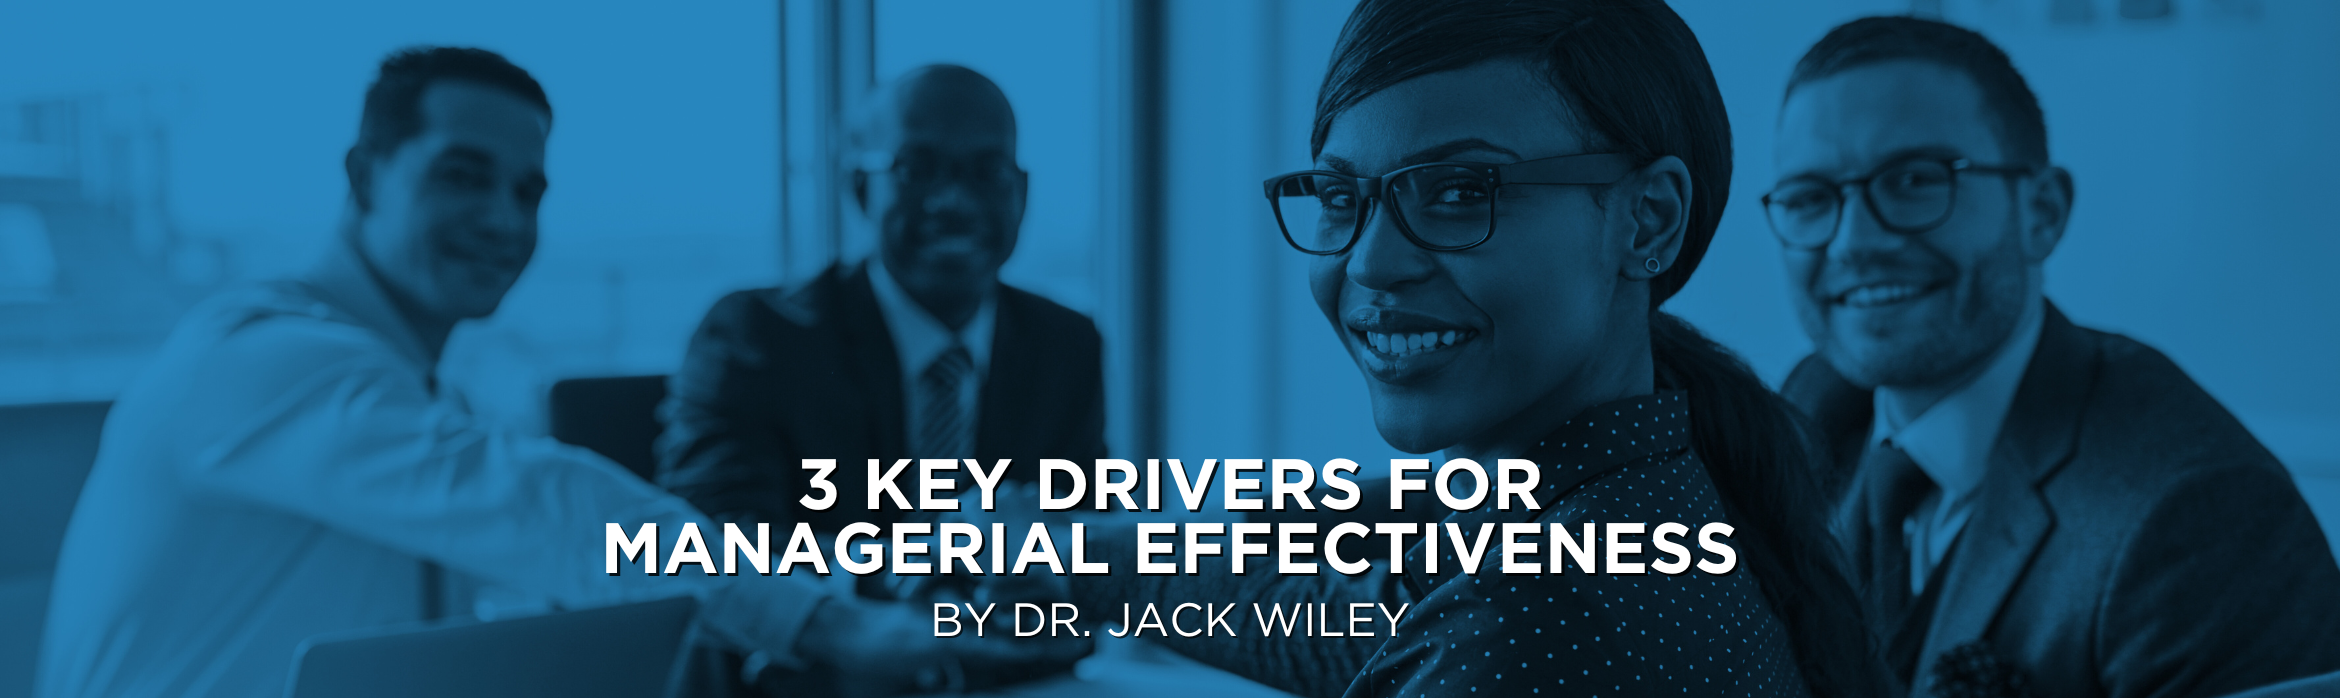 3 Key Drivers for Managerial Effectiveness